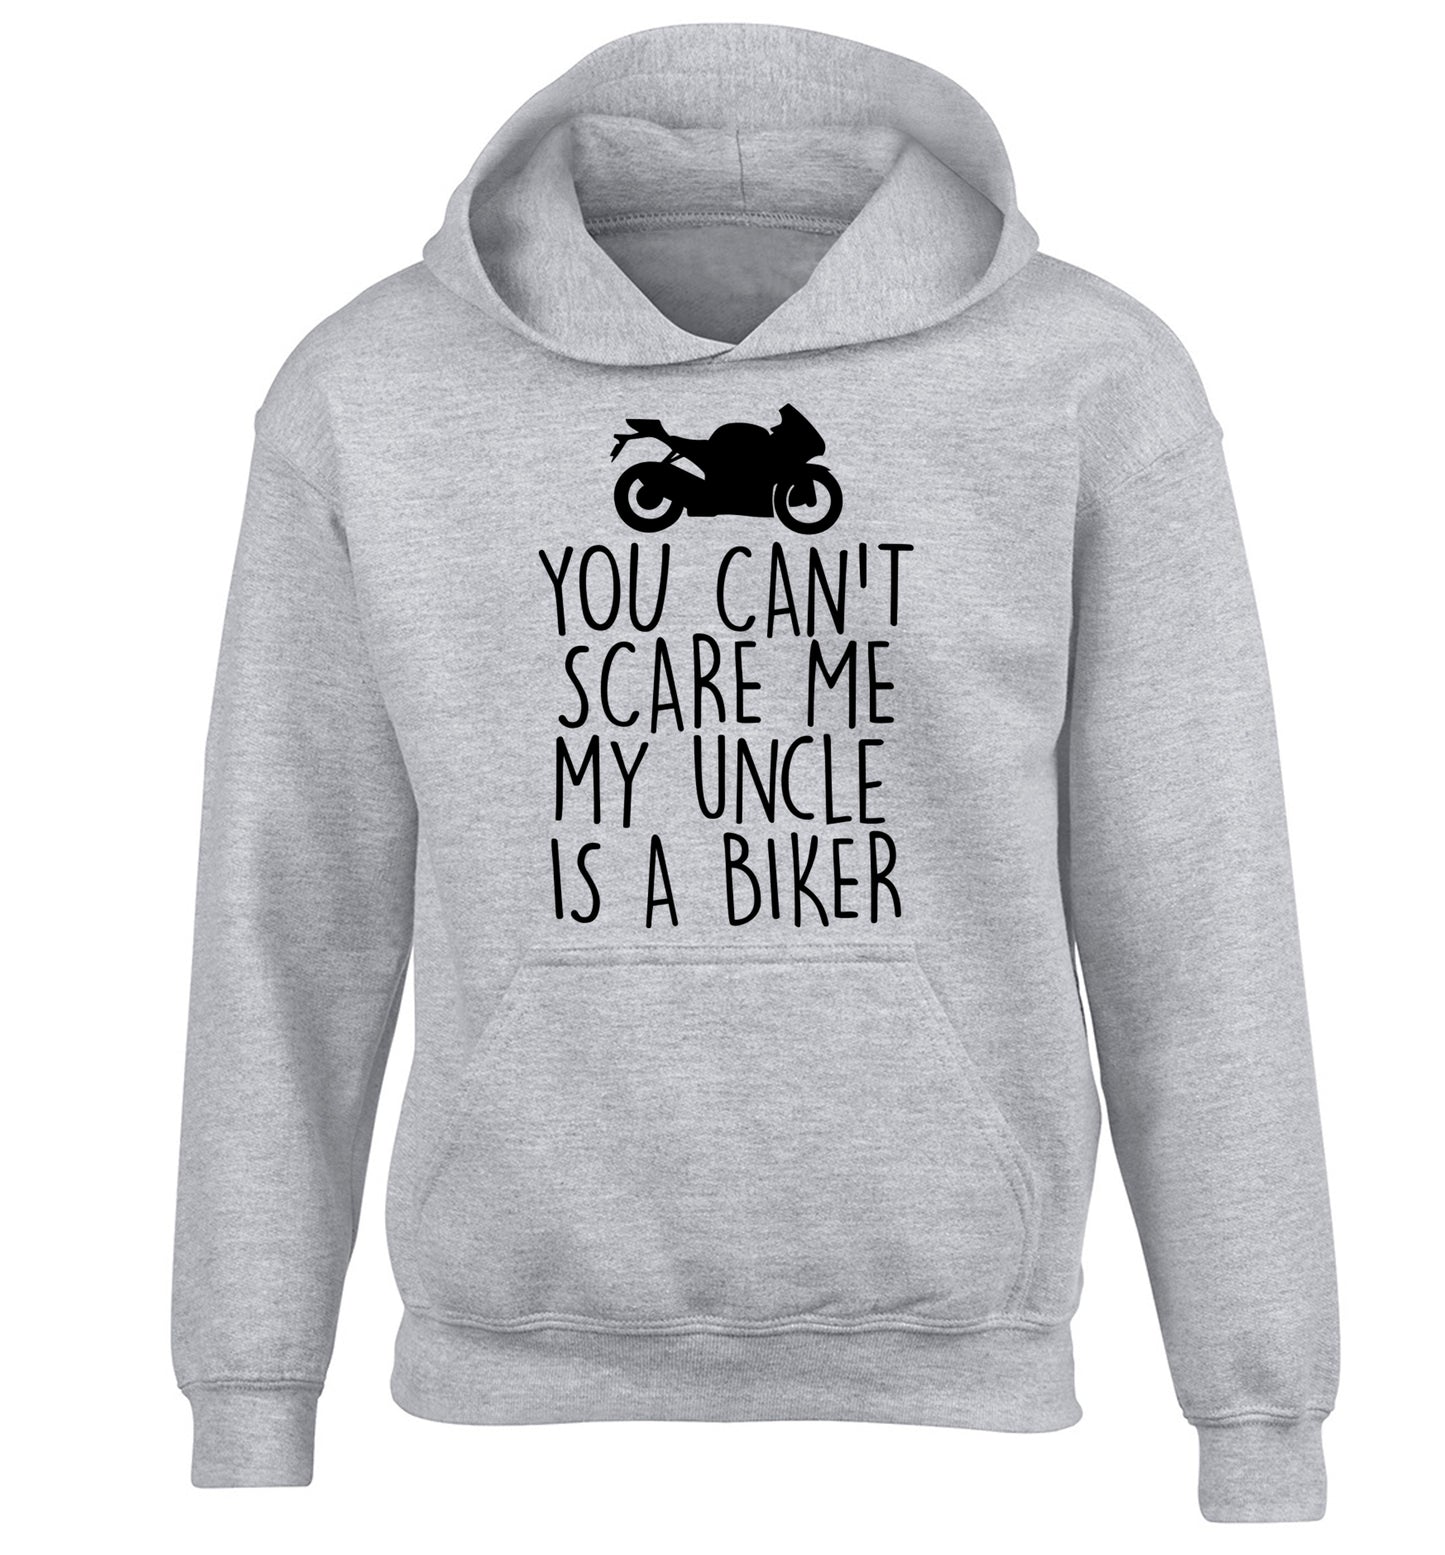 You can't scare me my uncle is a biker children's grey hoodie 12-13 Years